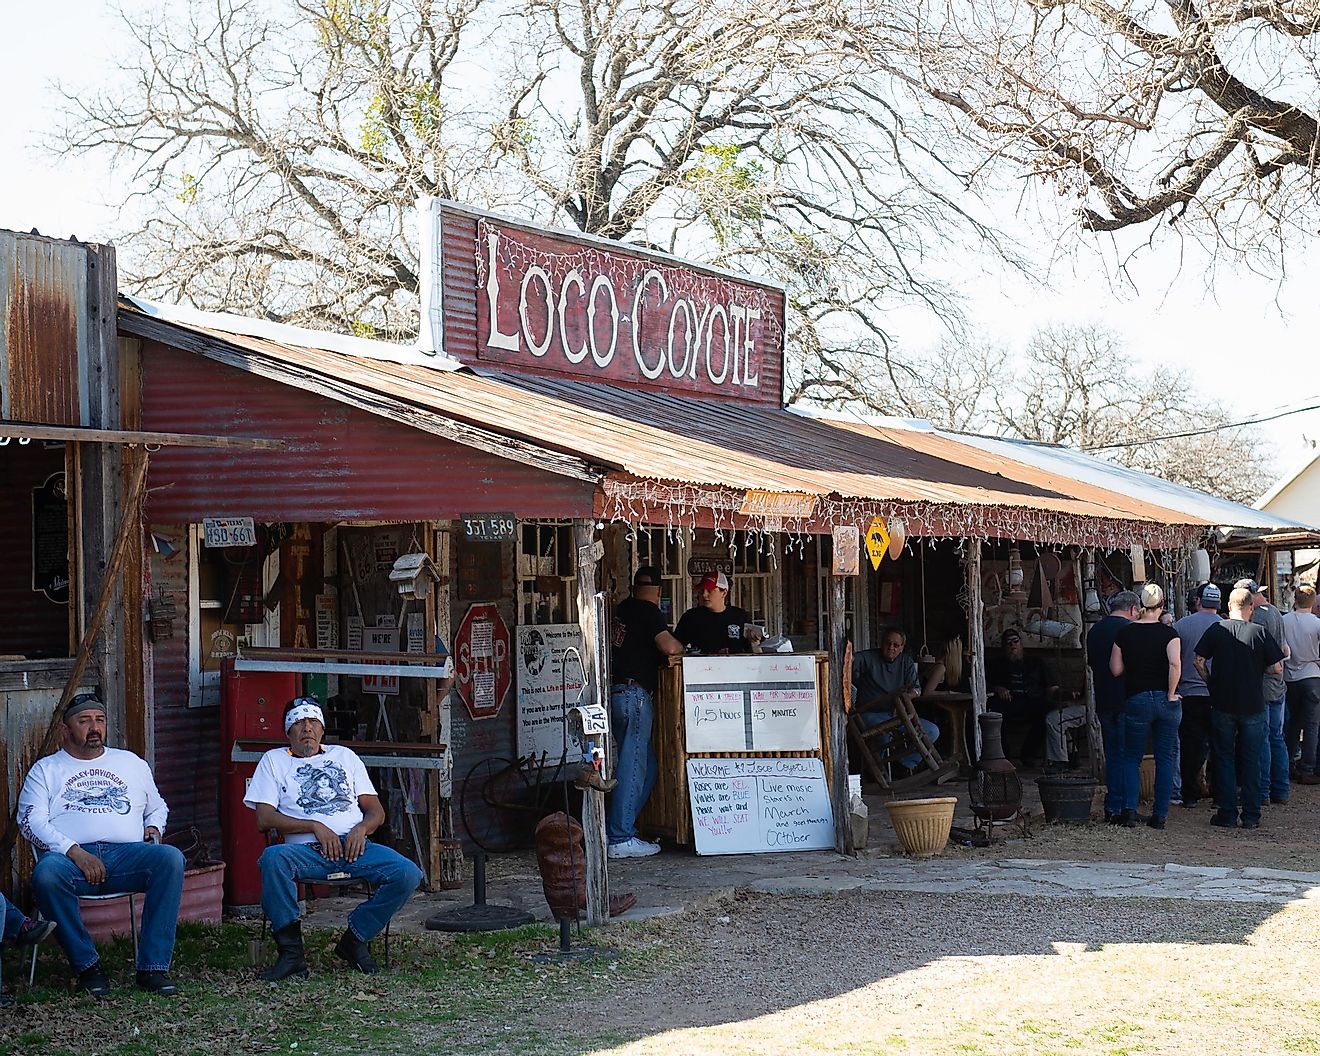 Motorcycles and Biker People at Loco Coyote Bar and Grill In Glen Rose Texas on a Sunny Day